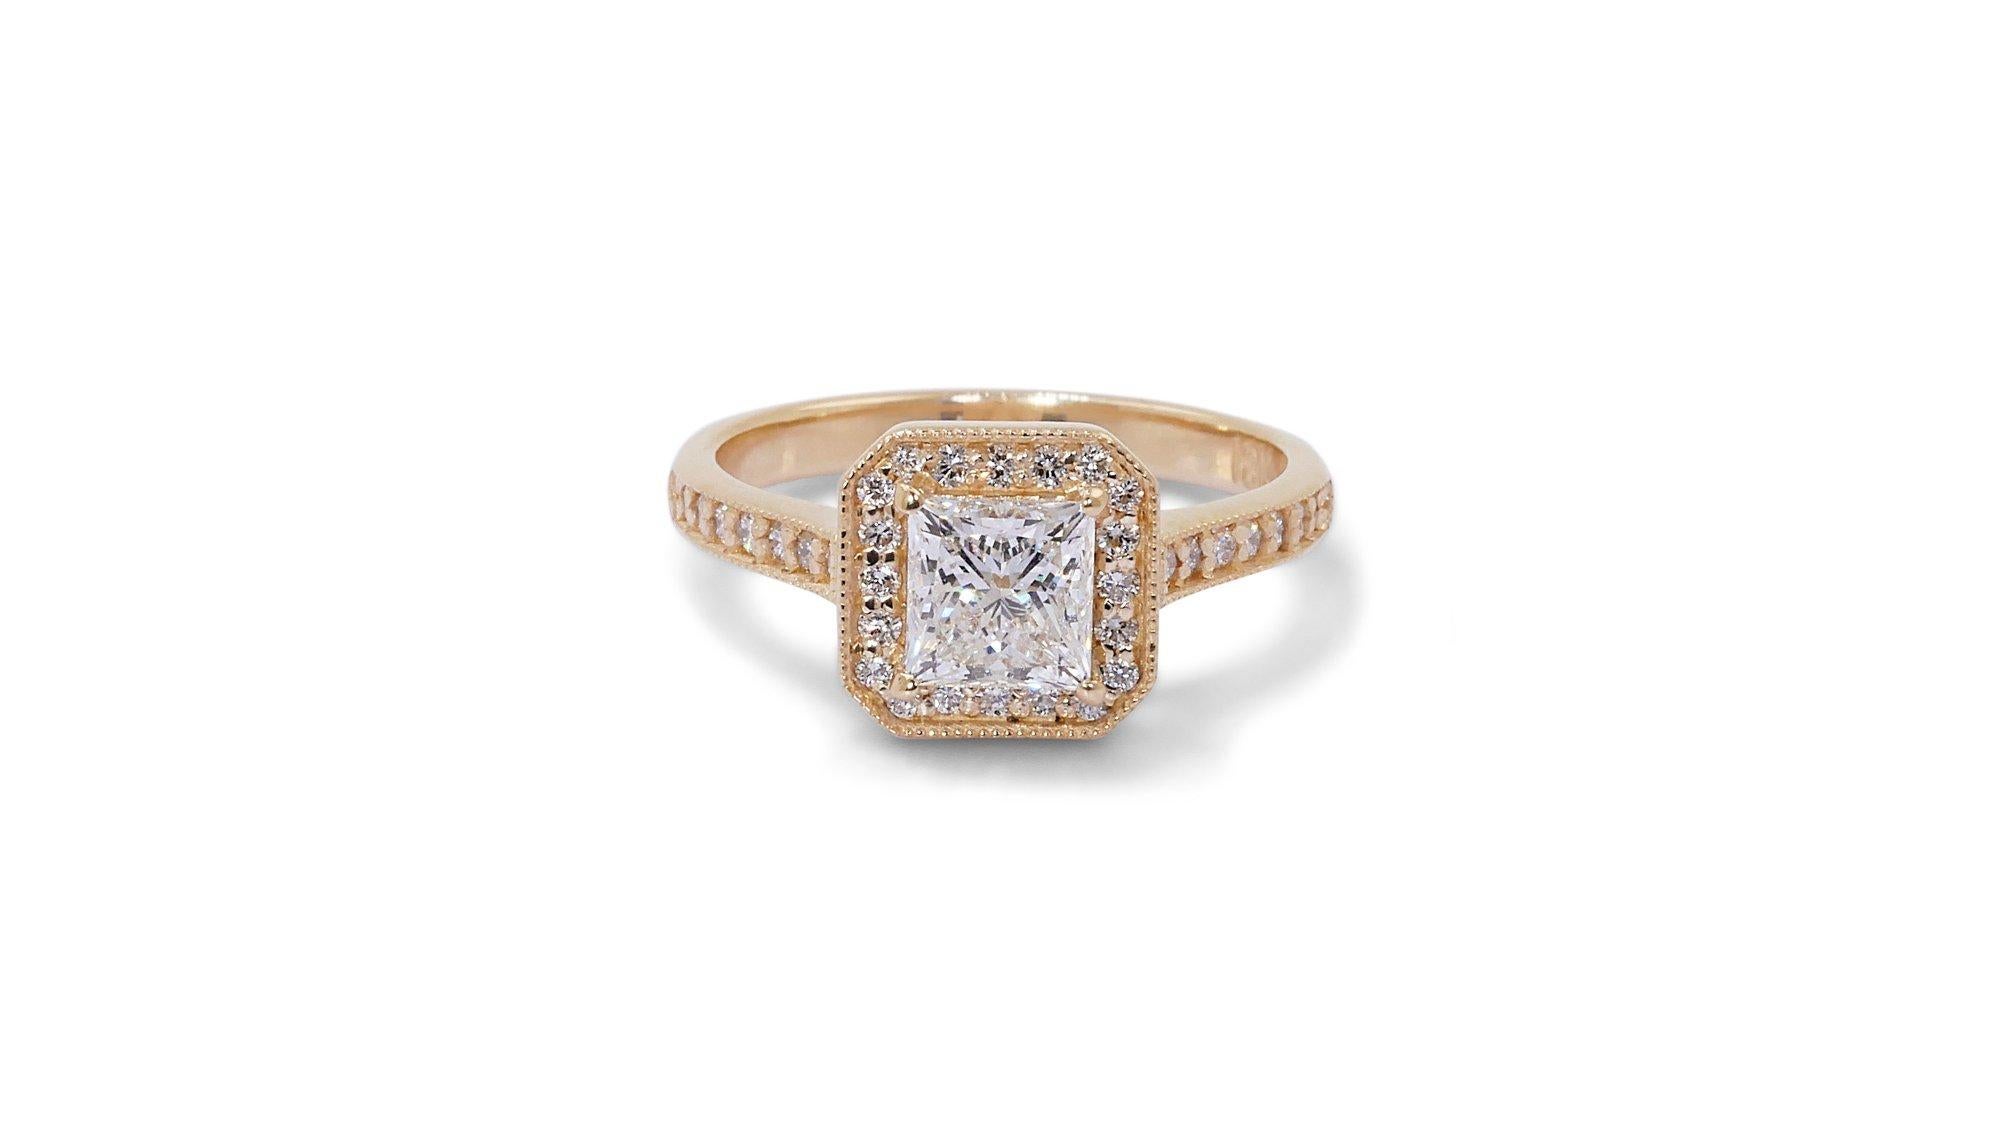 Stunning 1.35 Carat Princess Natural Diamond Ring in 18K Yellow Gold with IGI Certificate and Jewelry Box

This exquisite ring features a dazzling 1 carat princess natural diamond, set in a high-quality 18K Yellow Gold setting with a high polish.